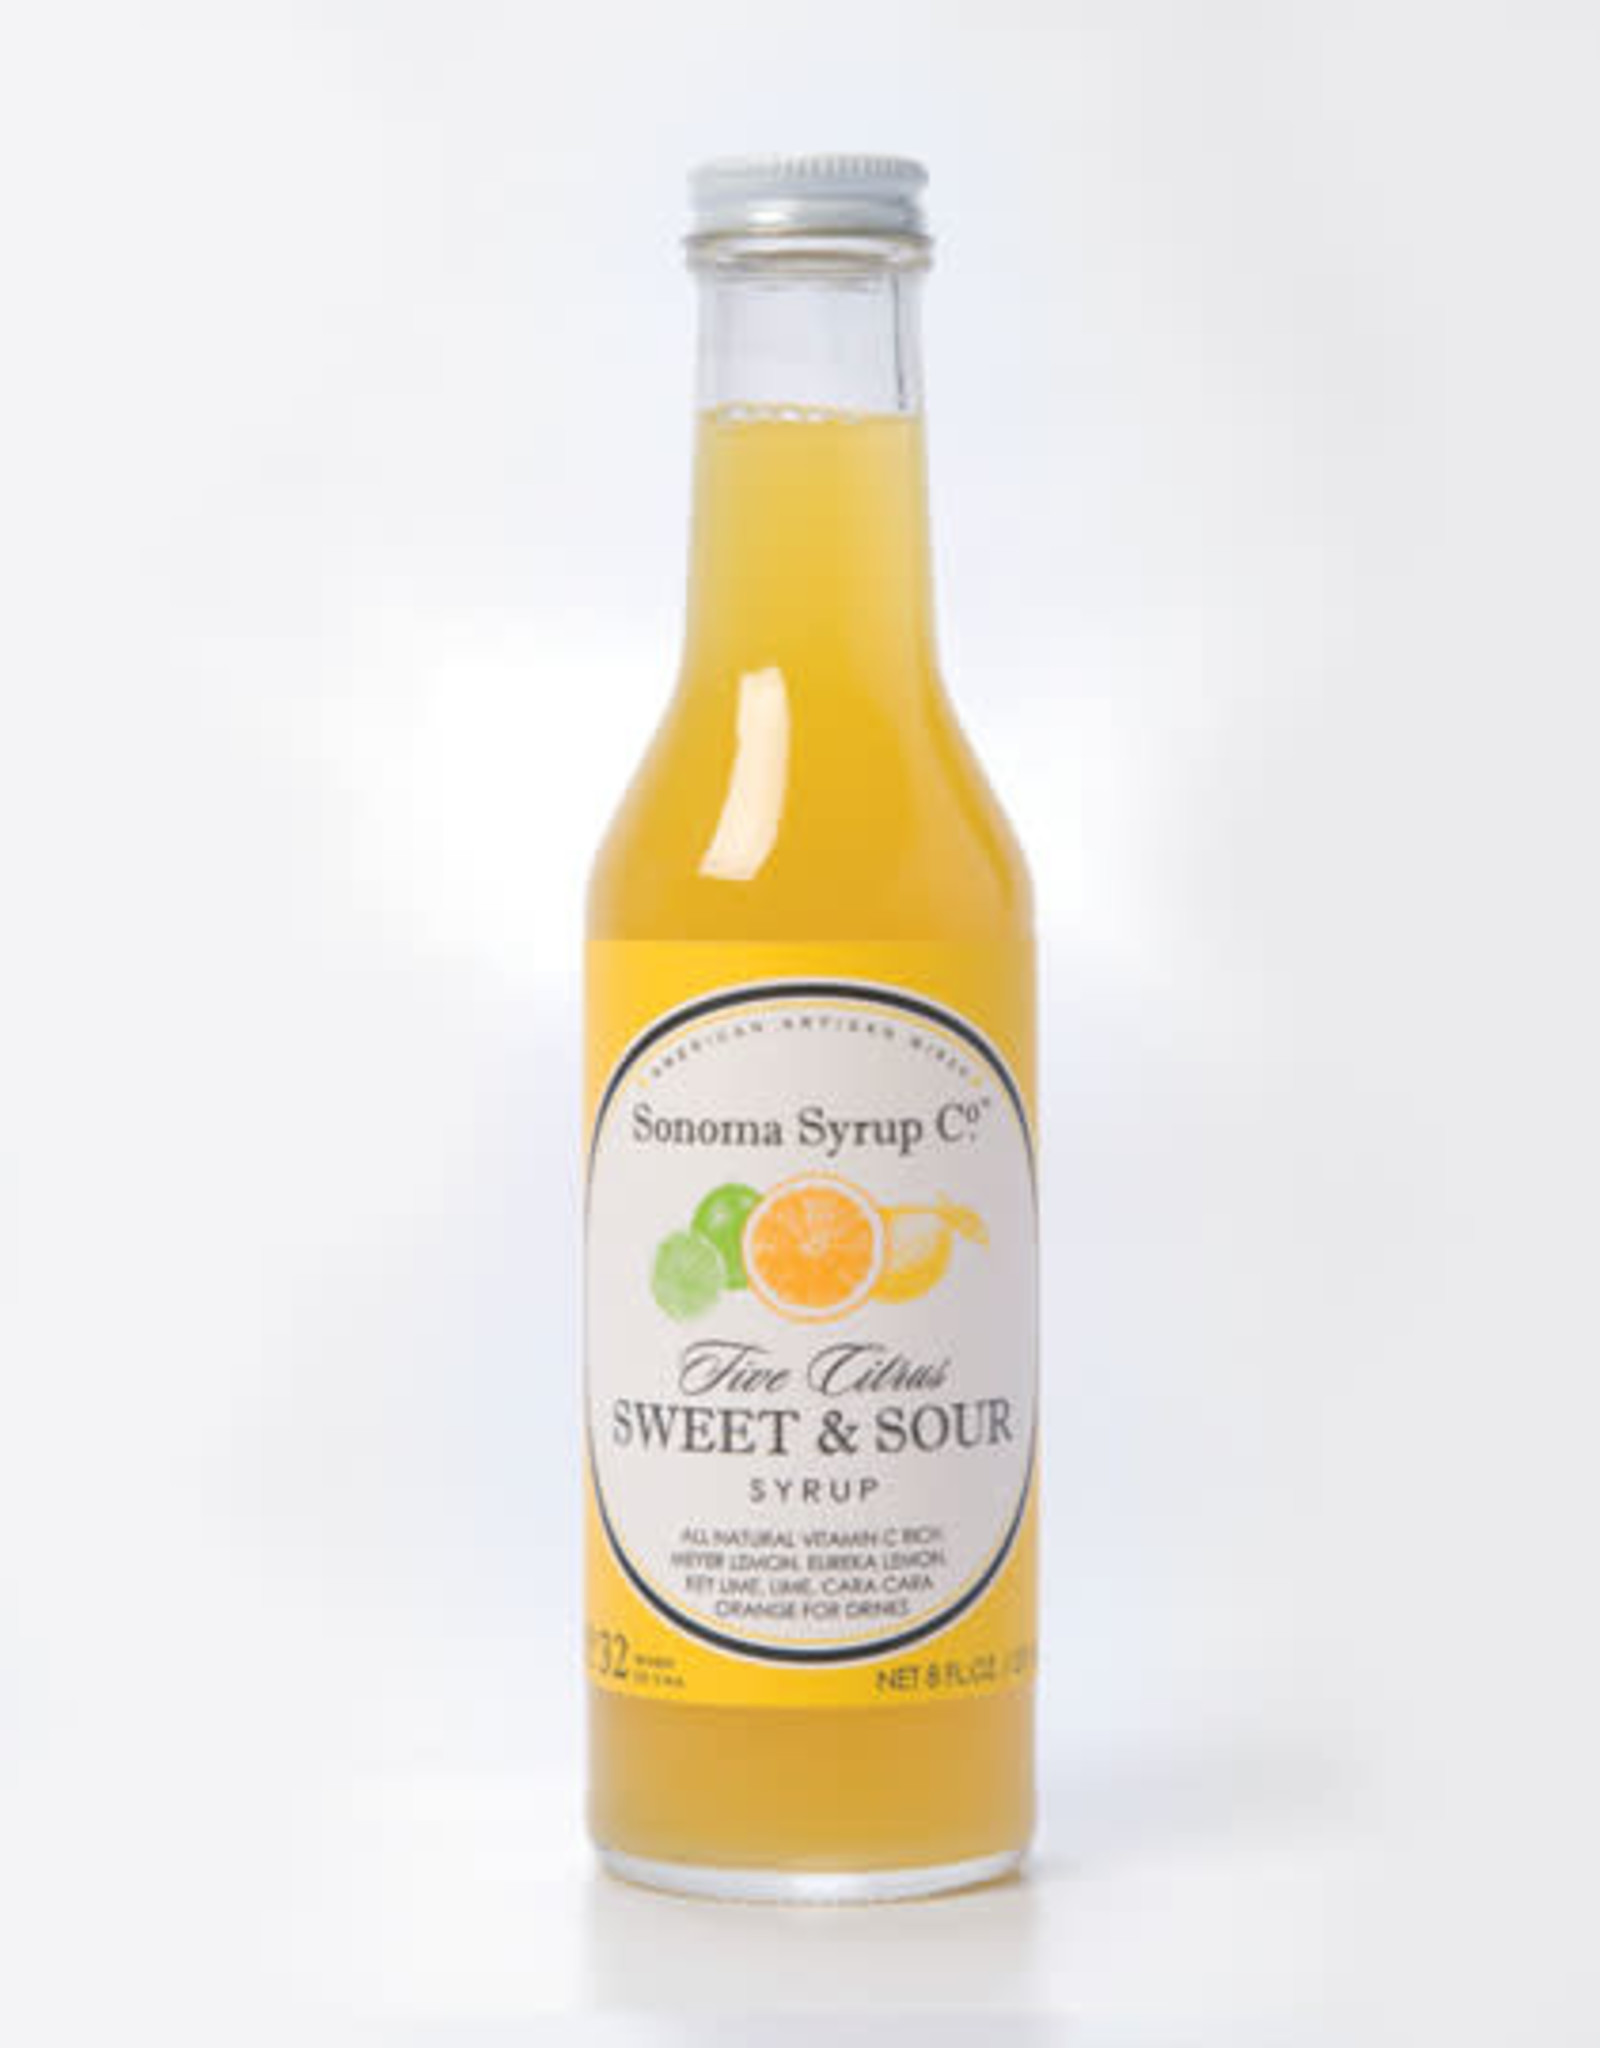 Sonoma Syrup Co. Five Citrus Sweet & Sour Syrup